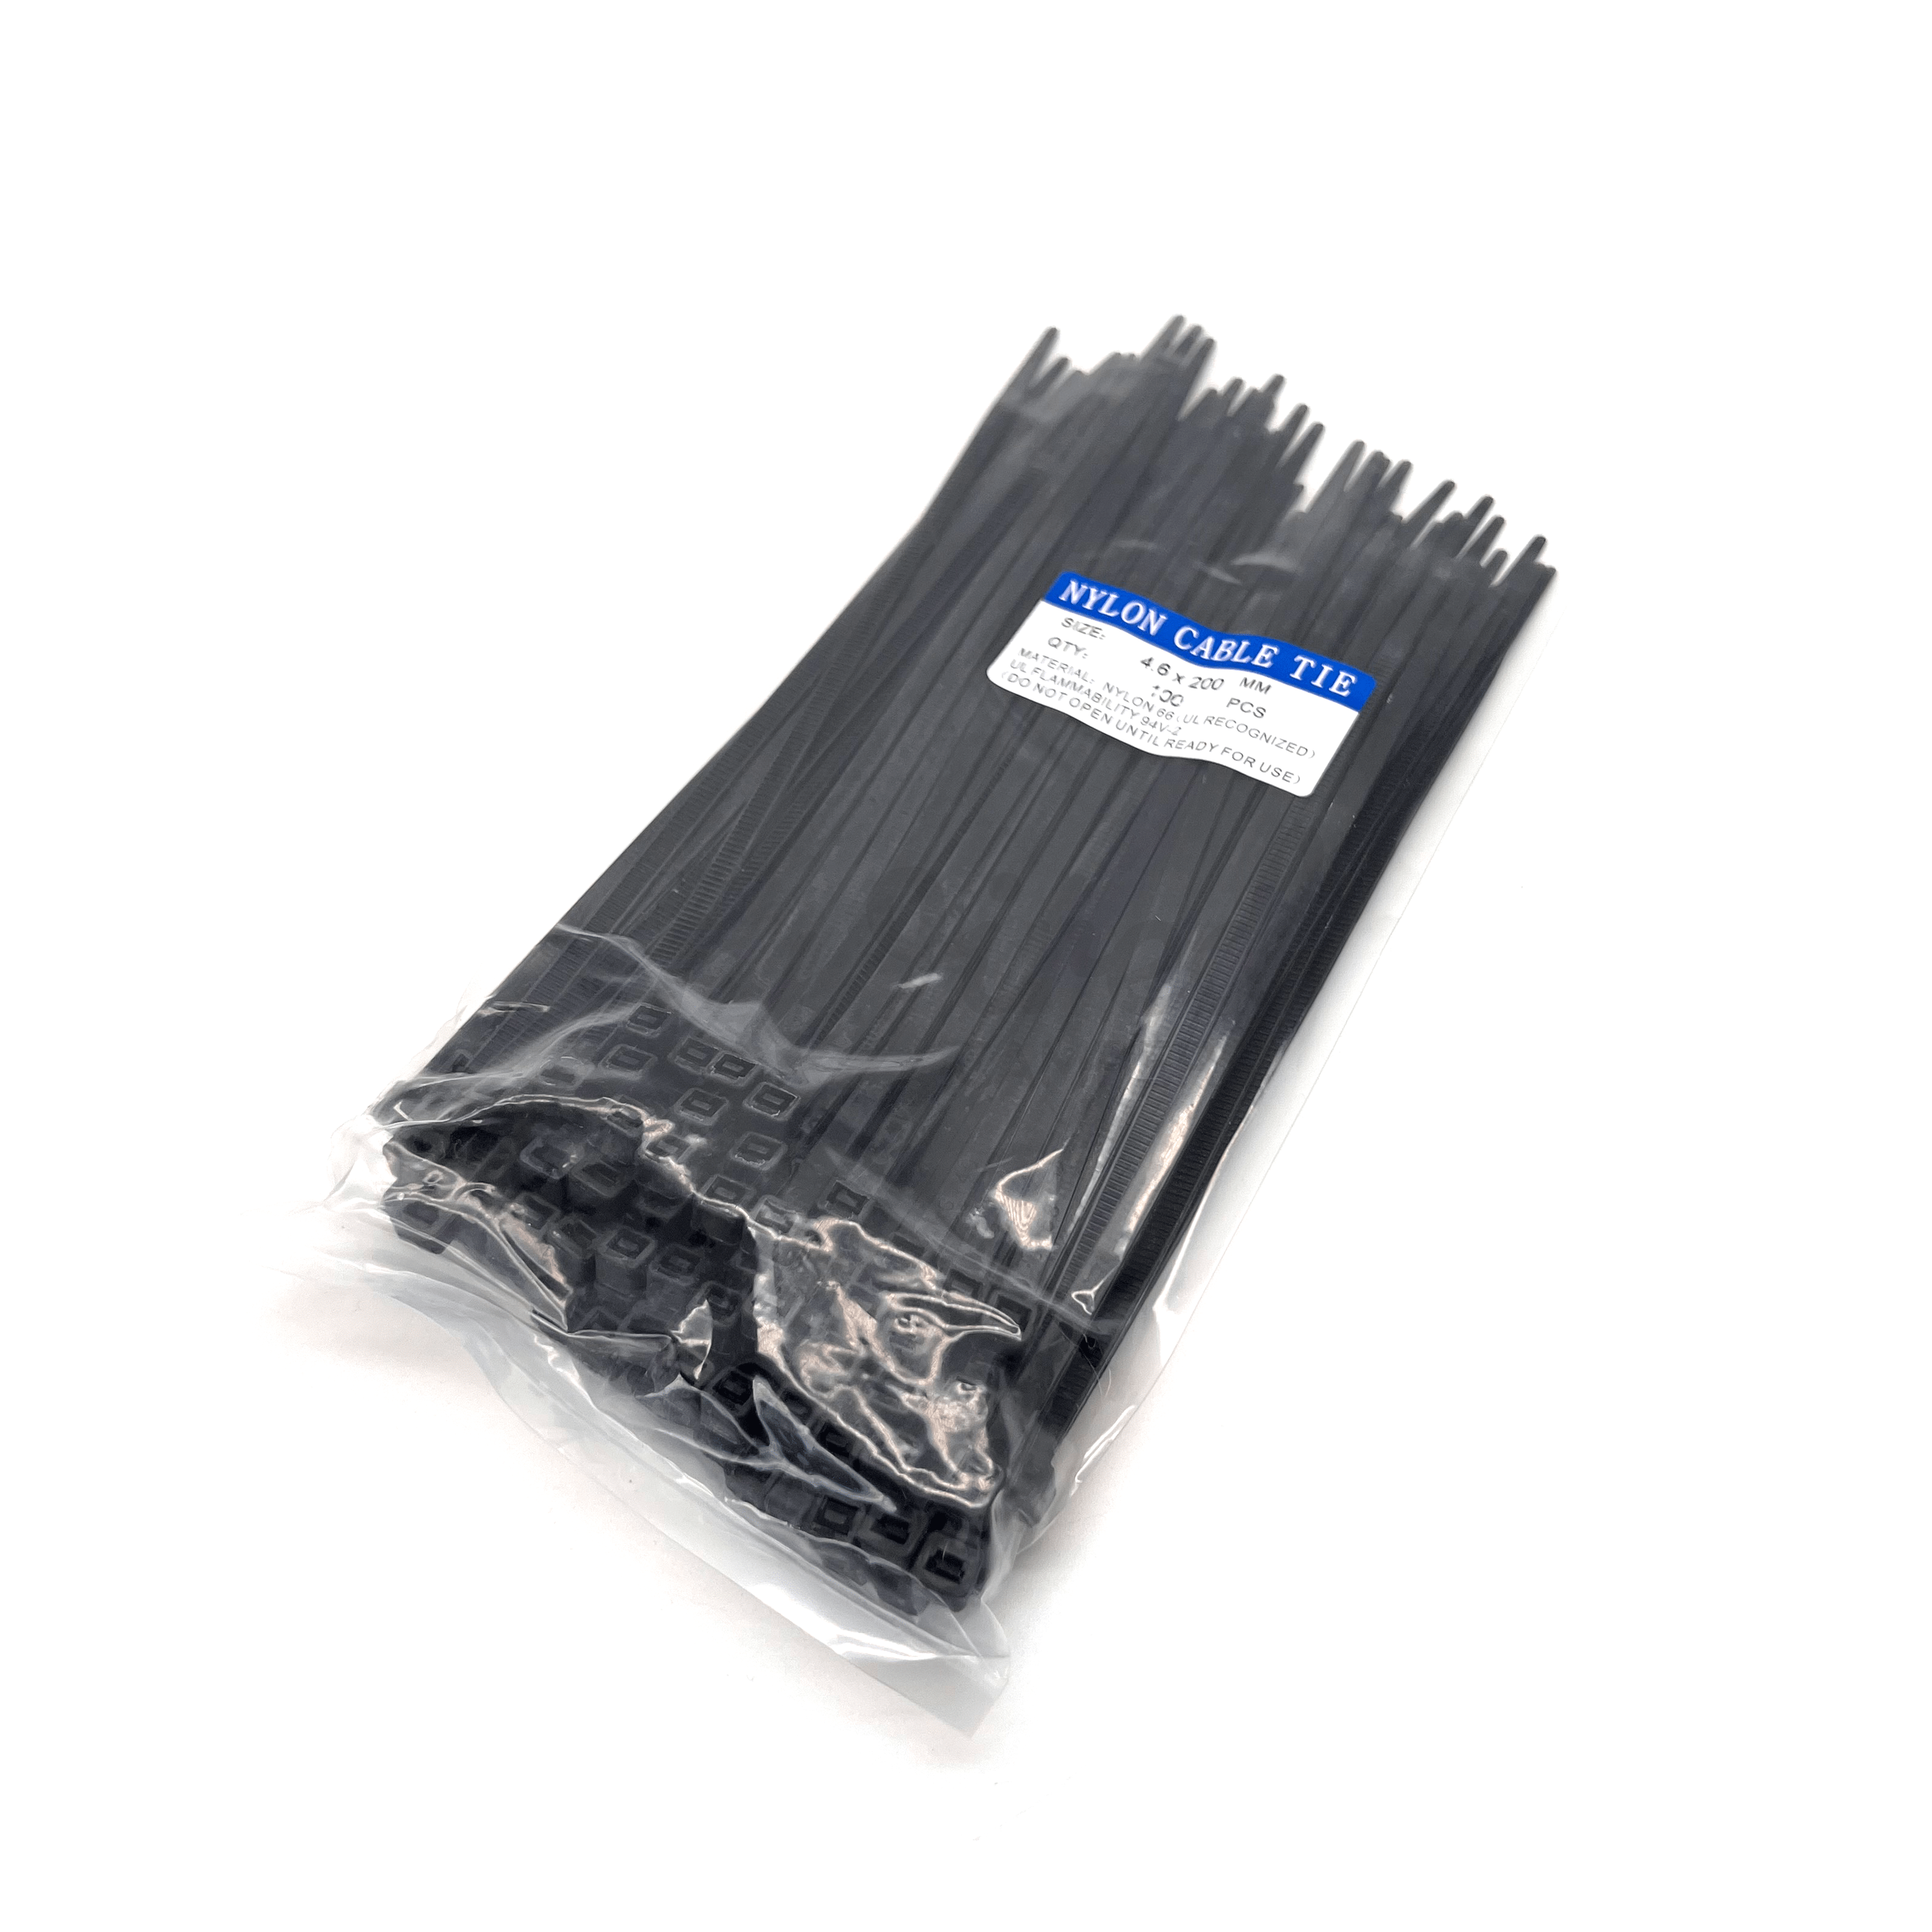 Wired Campers Limited 100 X Black Nylon Cable Ties 200M X 4.6MM